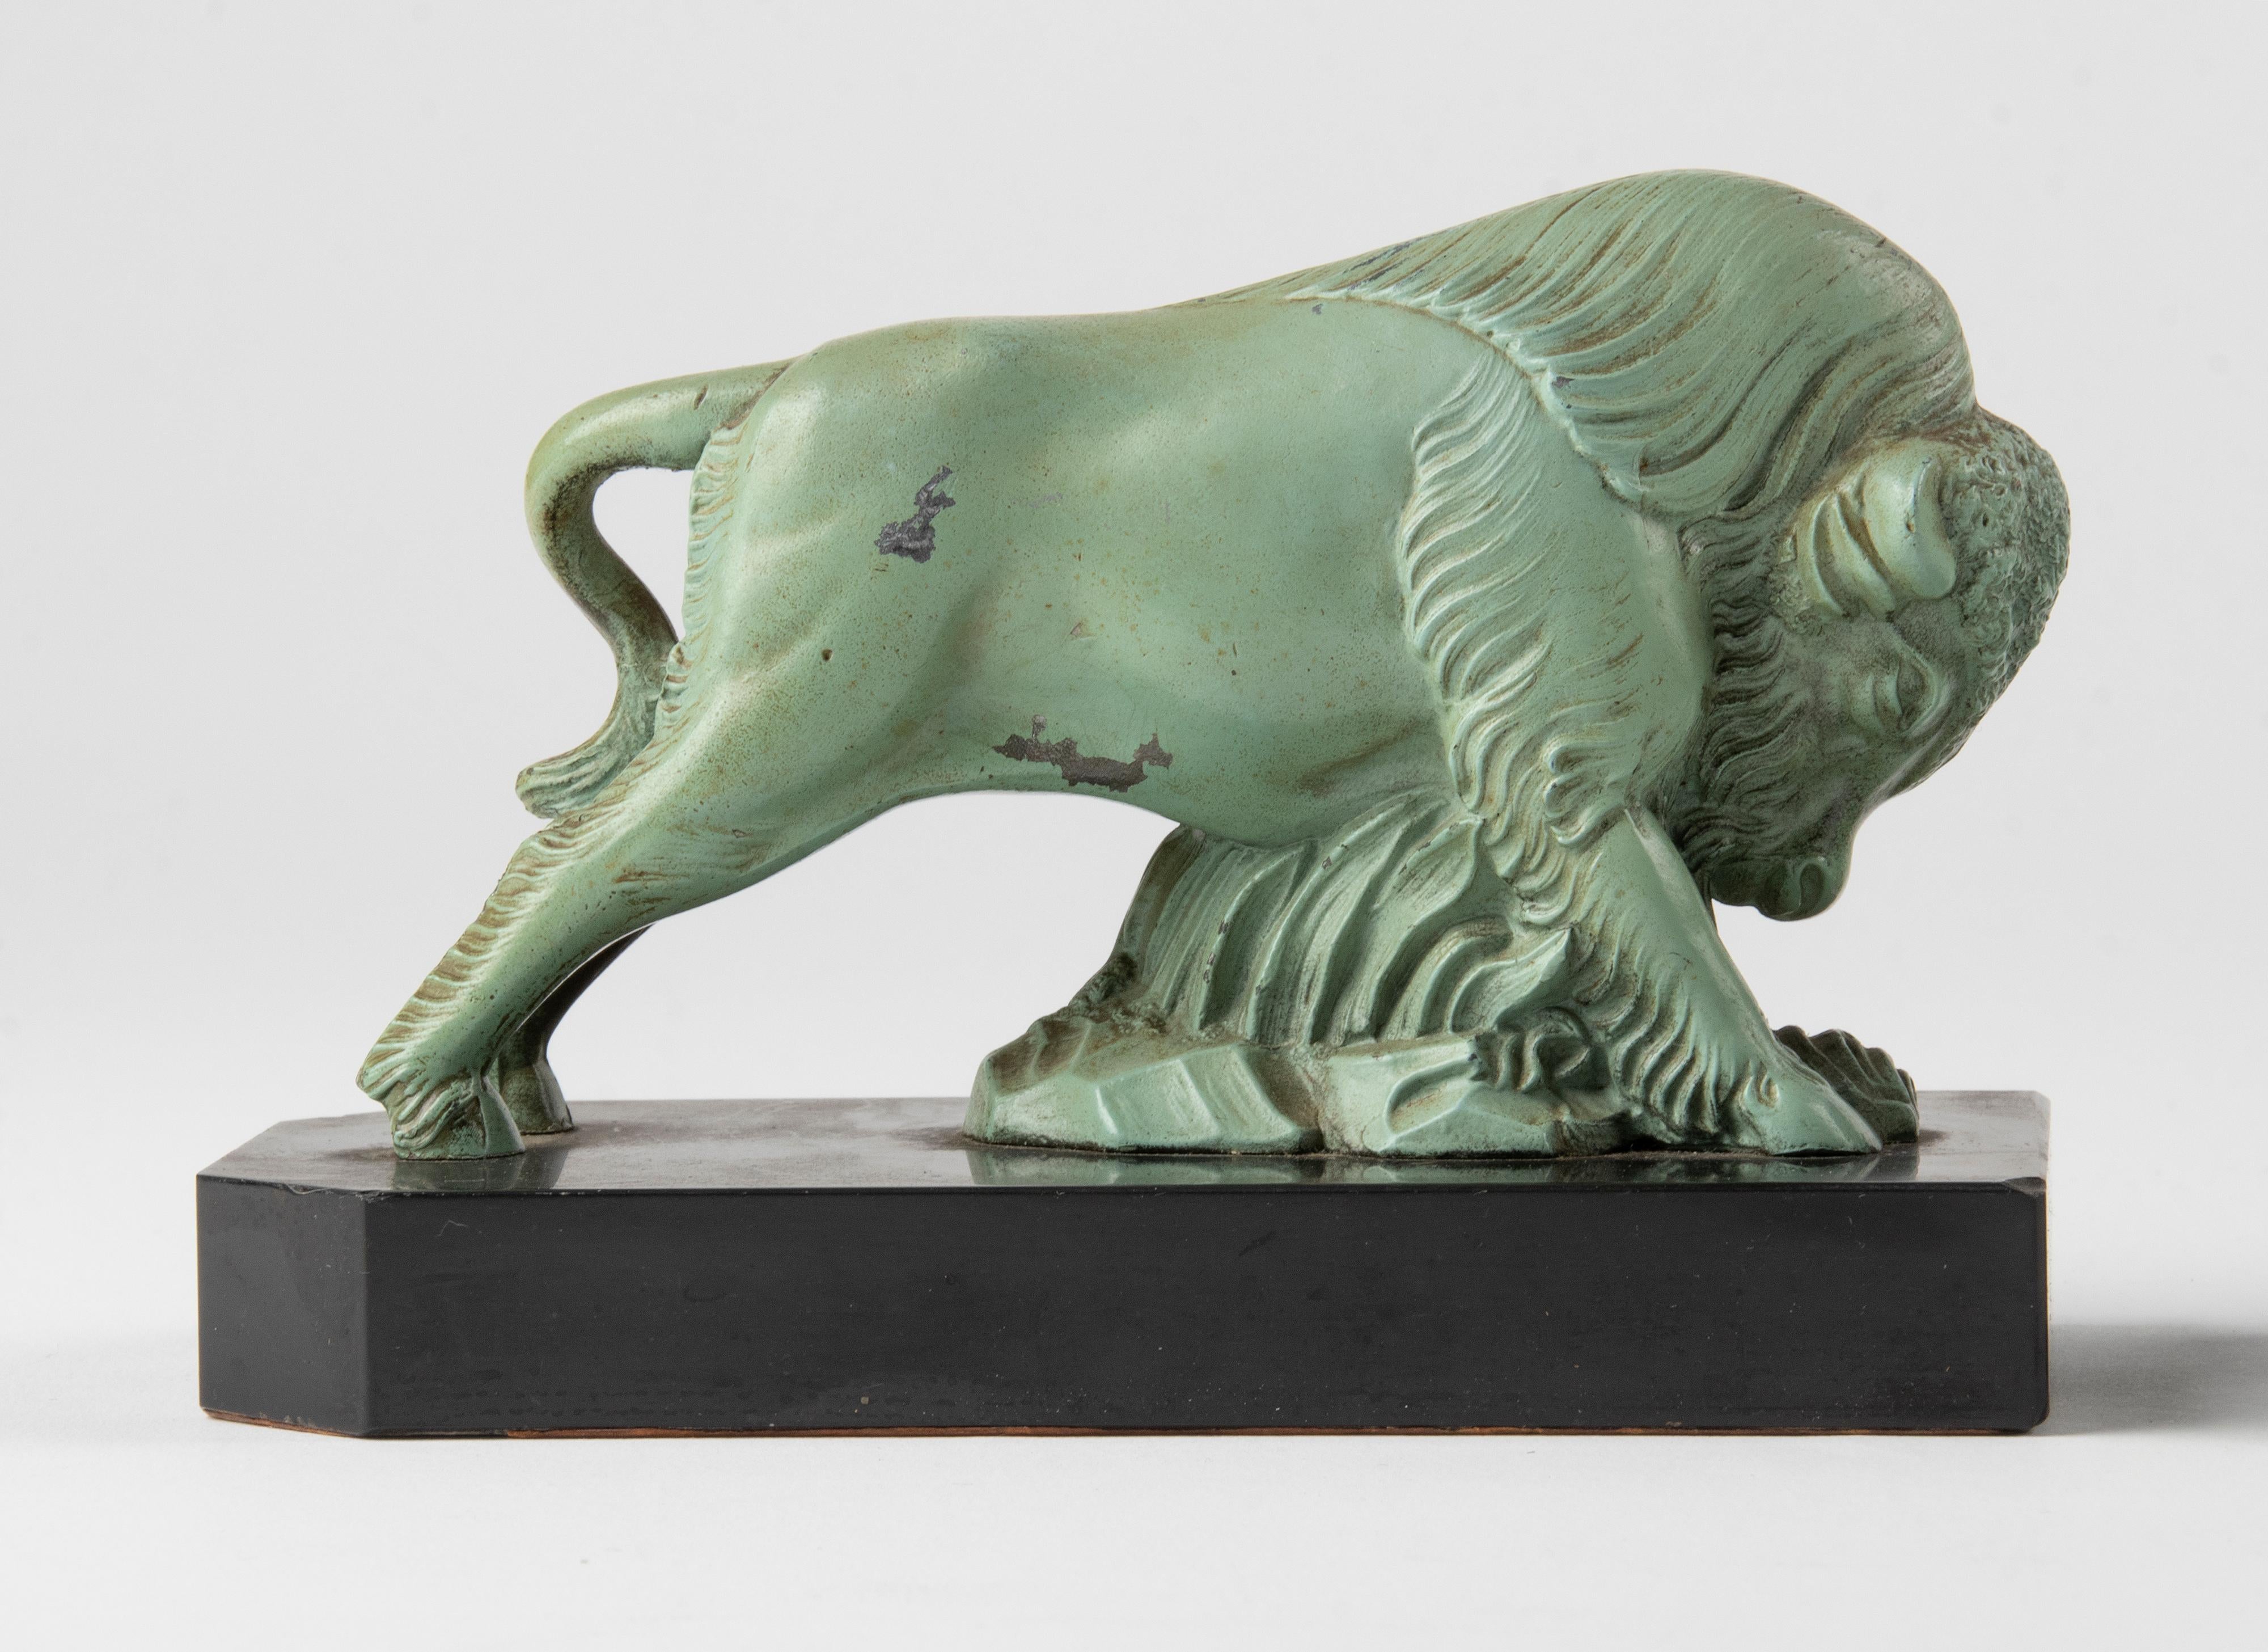 Hand-Crafted Pair of 1930's Art Deco Book Ends with Bison Made of Marble and Spelter